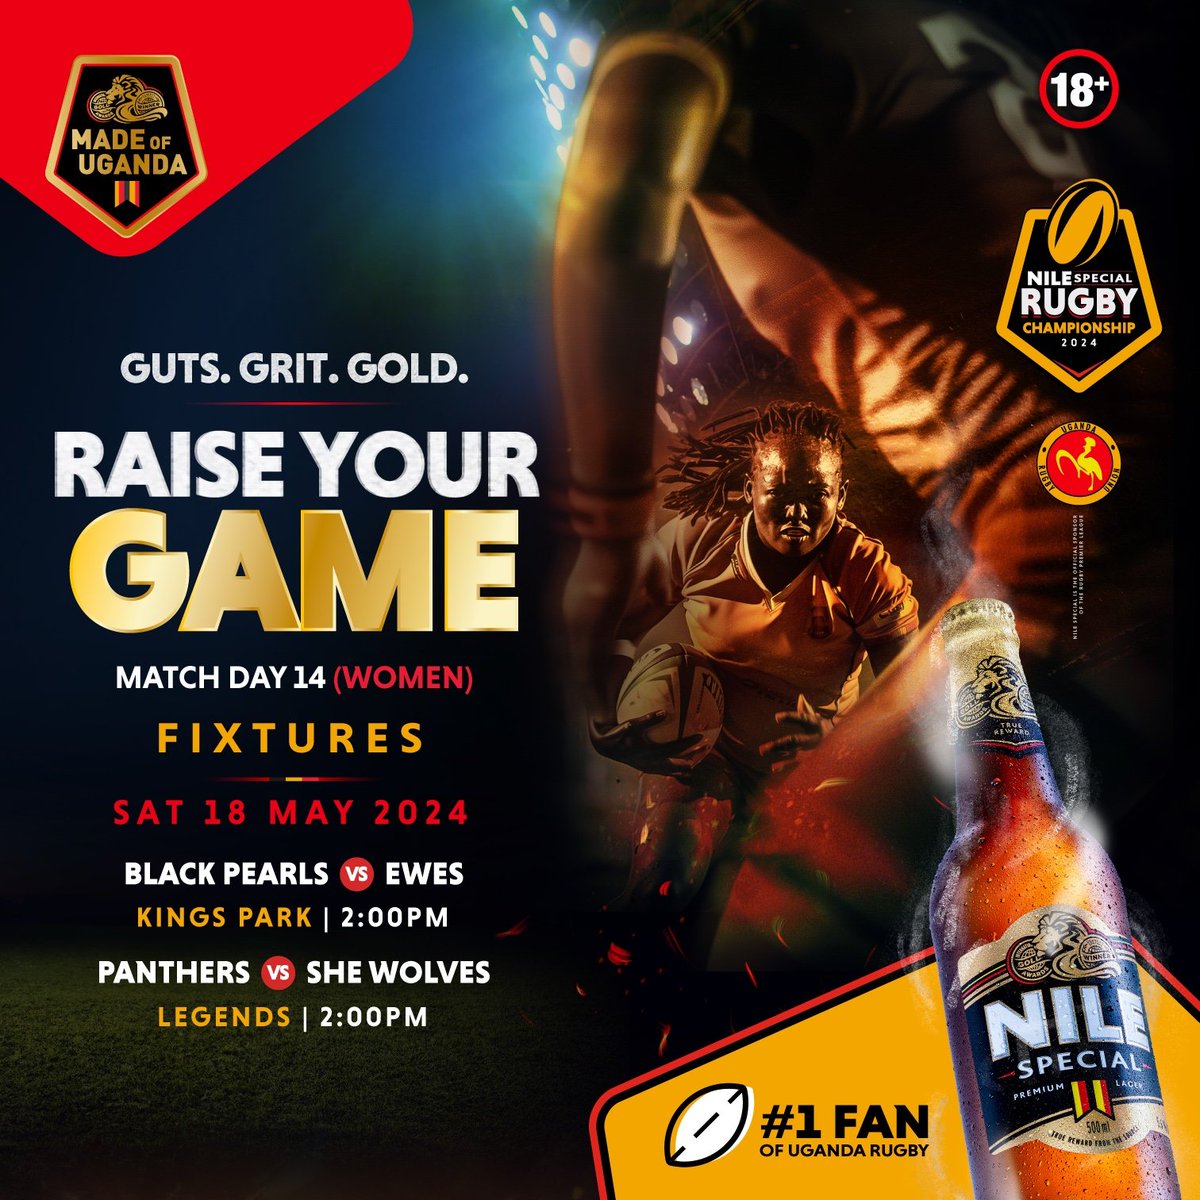 The Ladies too will take to the turf in two thrilling games at @LegendsKla and @Kingsparkarena. Come thru and support Women's rugby. Bring a friend or 5. 😁

#NileSpecialRugby
#RaiseYourGame
#GutsGritGold